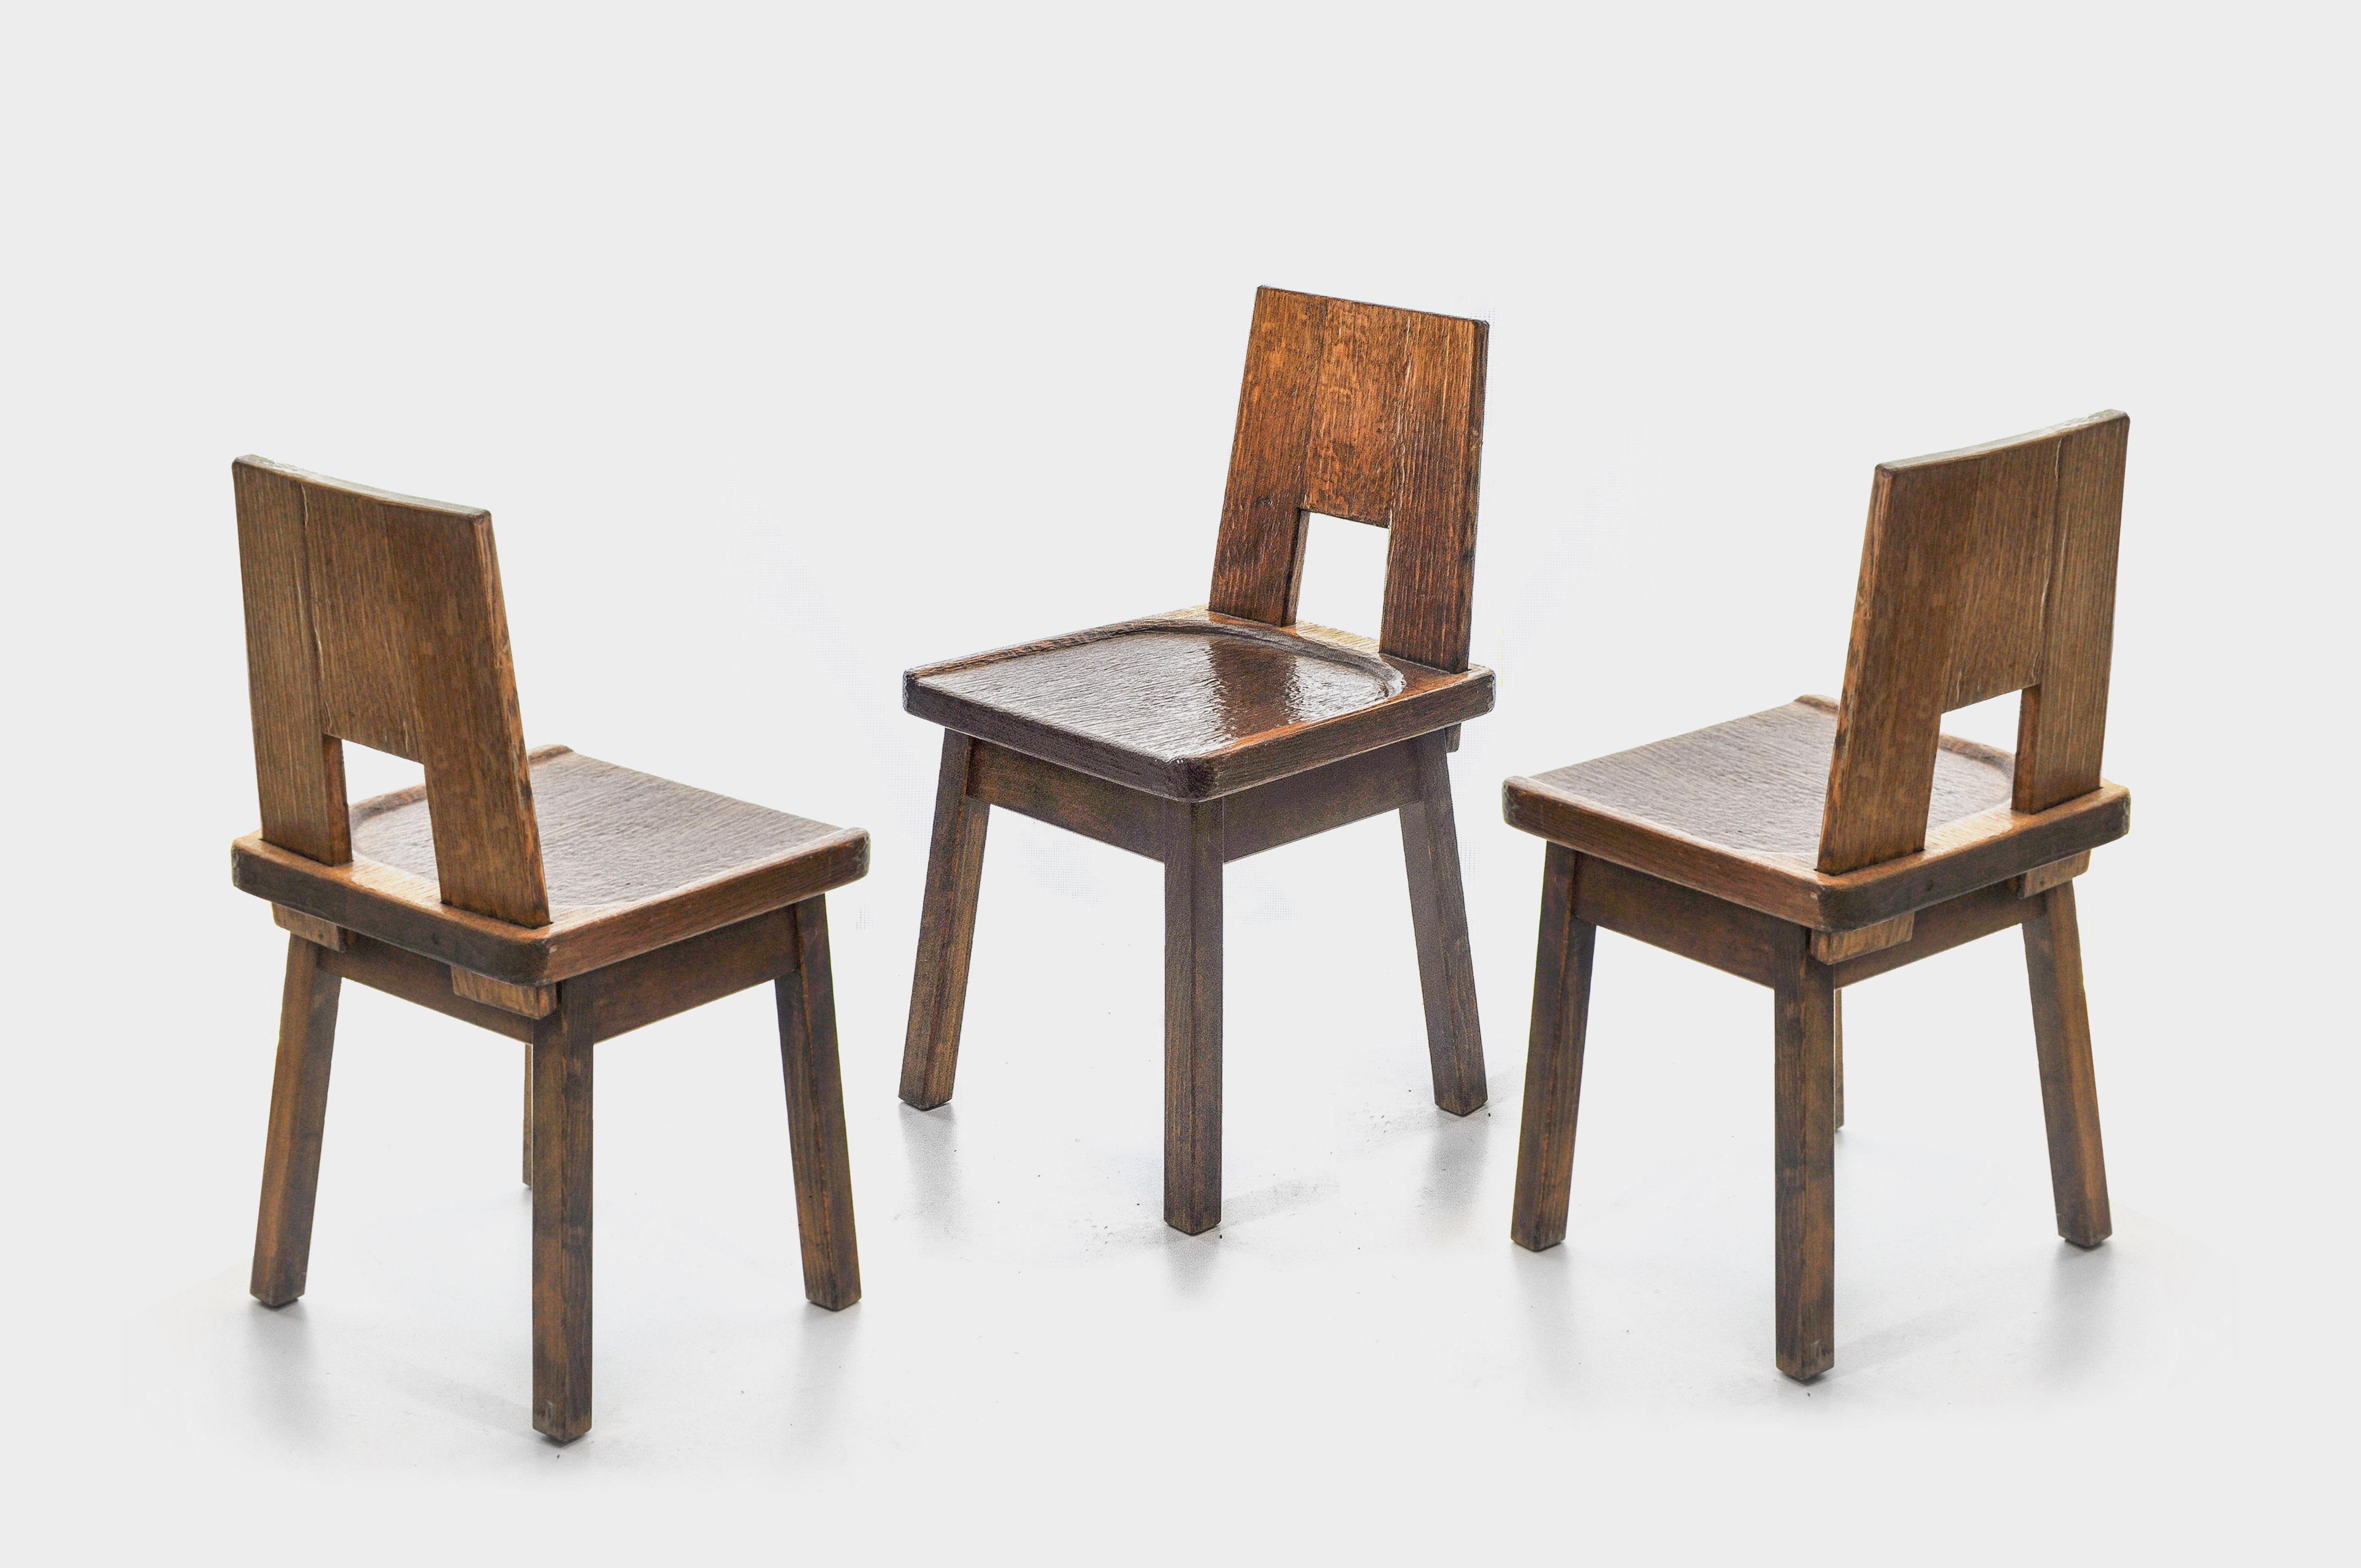 Hand Carved, Brutalistic Chairs Made of Solid Oak 2